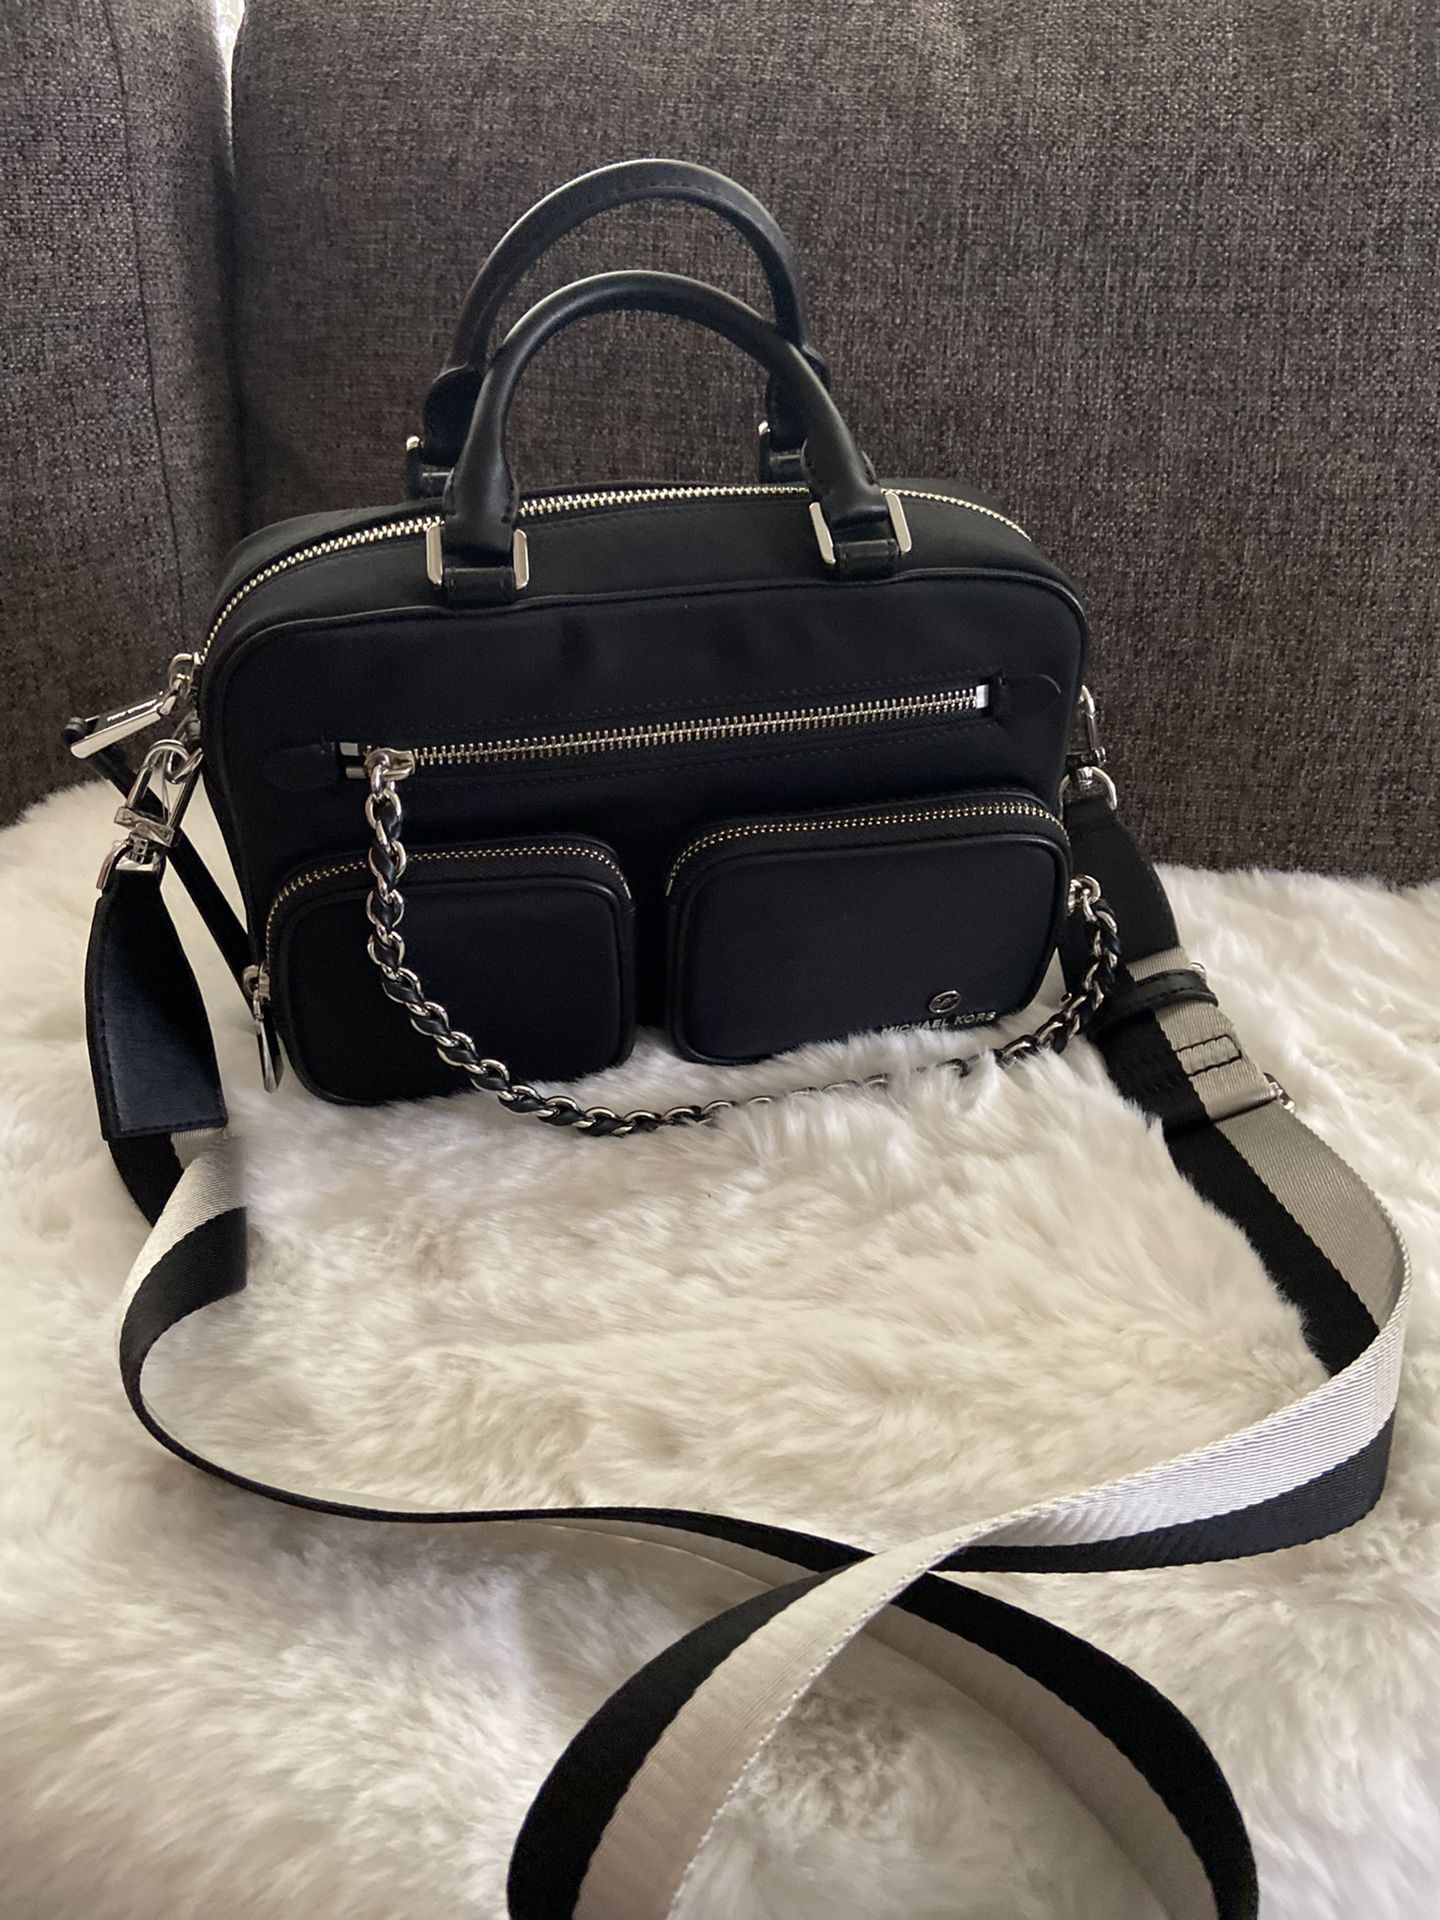 New Michael Kors Crossbody Thick Strap Bag for Sale in Long Beach